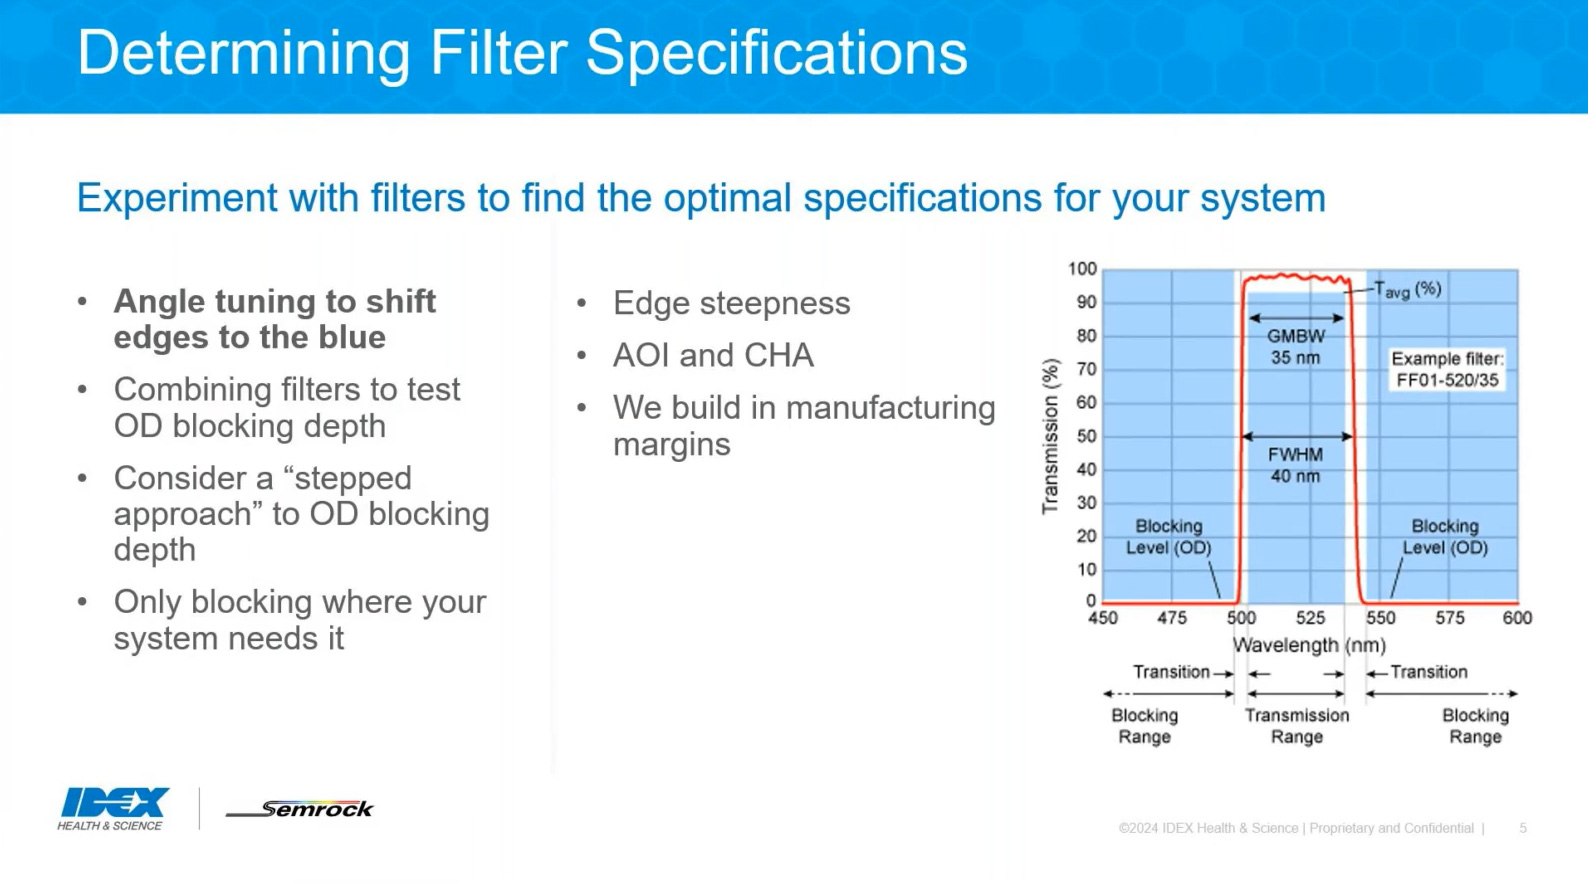 filter specifications - bandwidth, edge steepness, and more